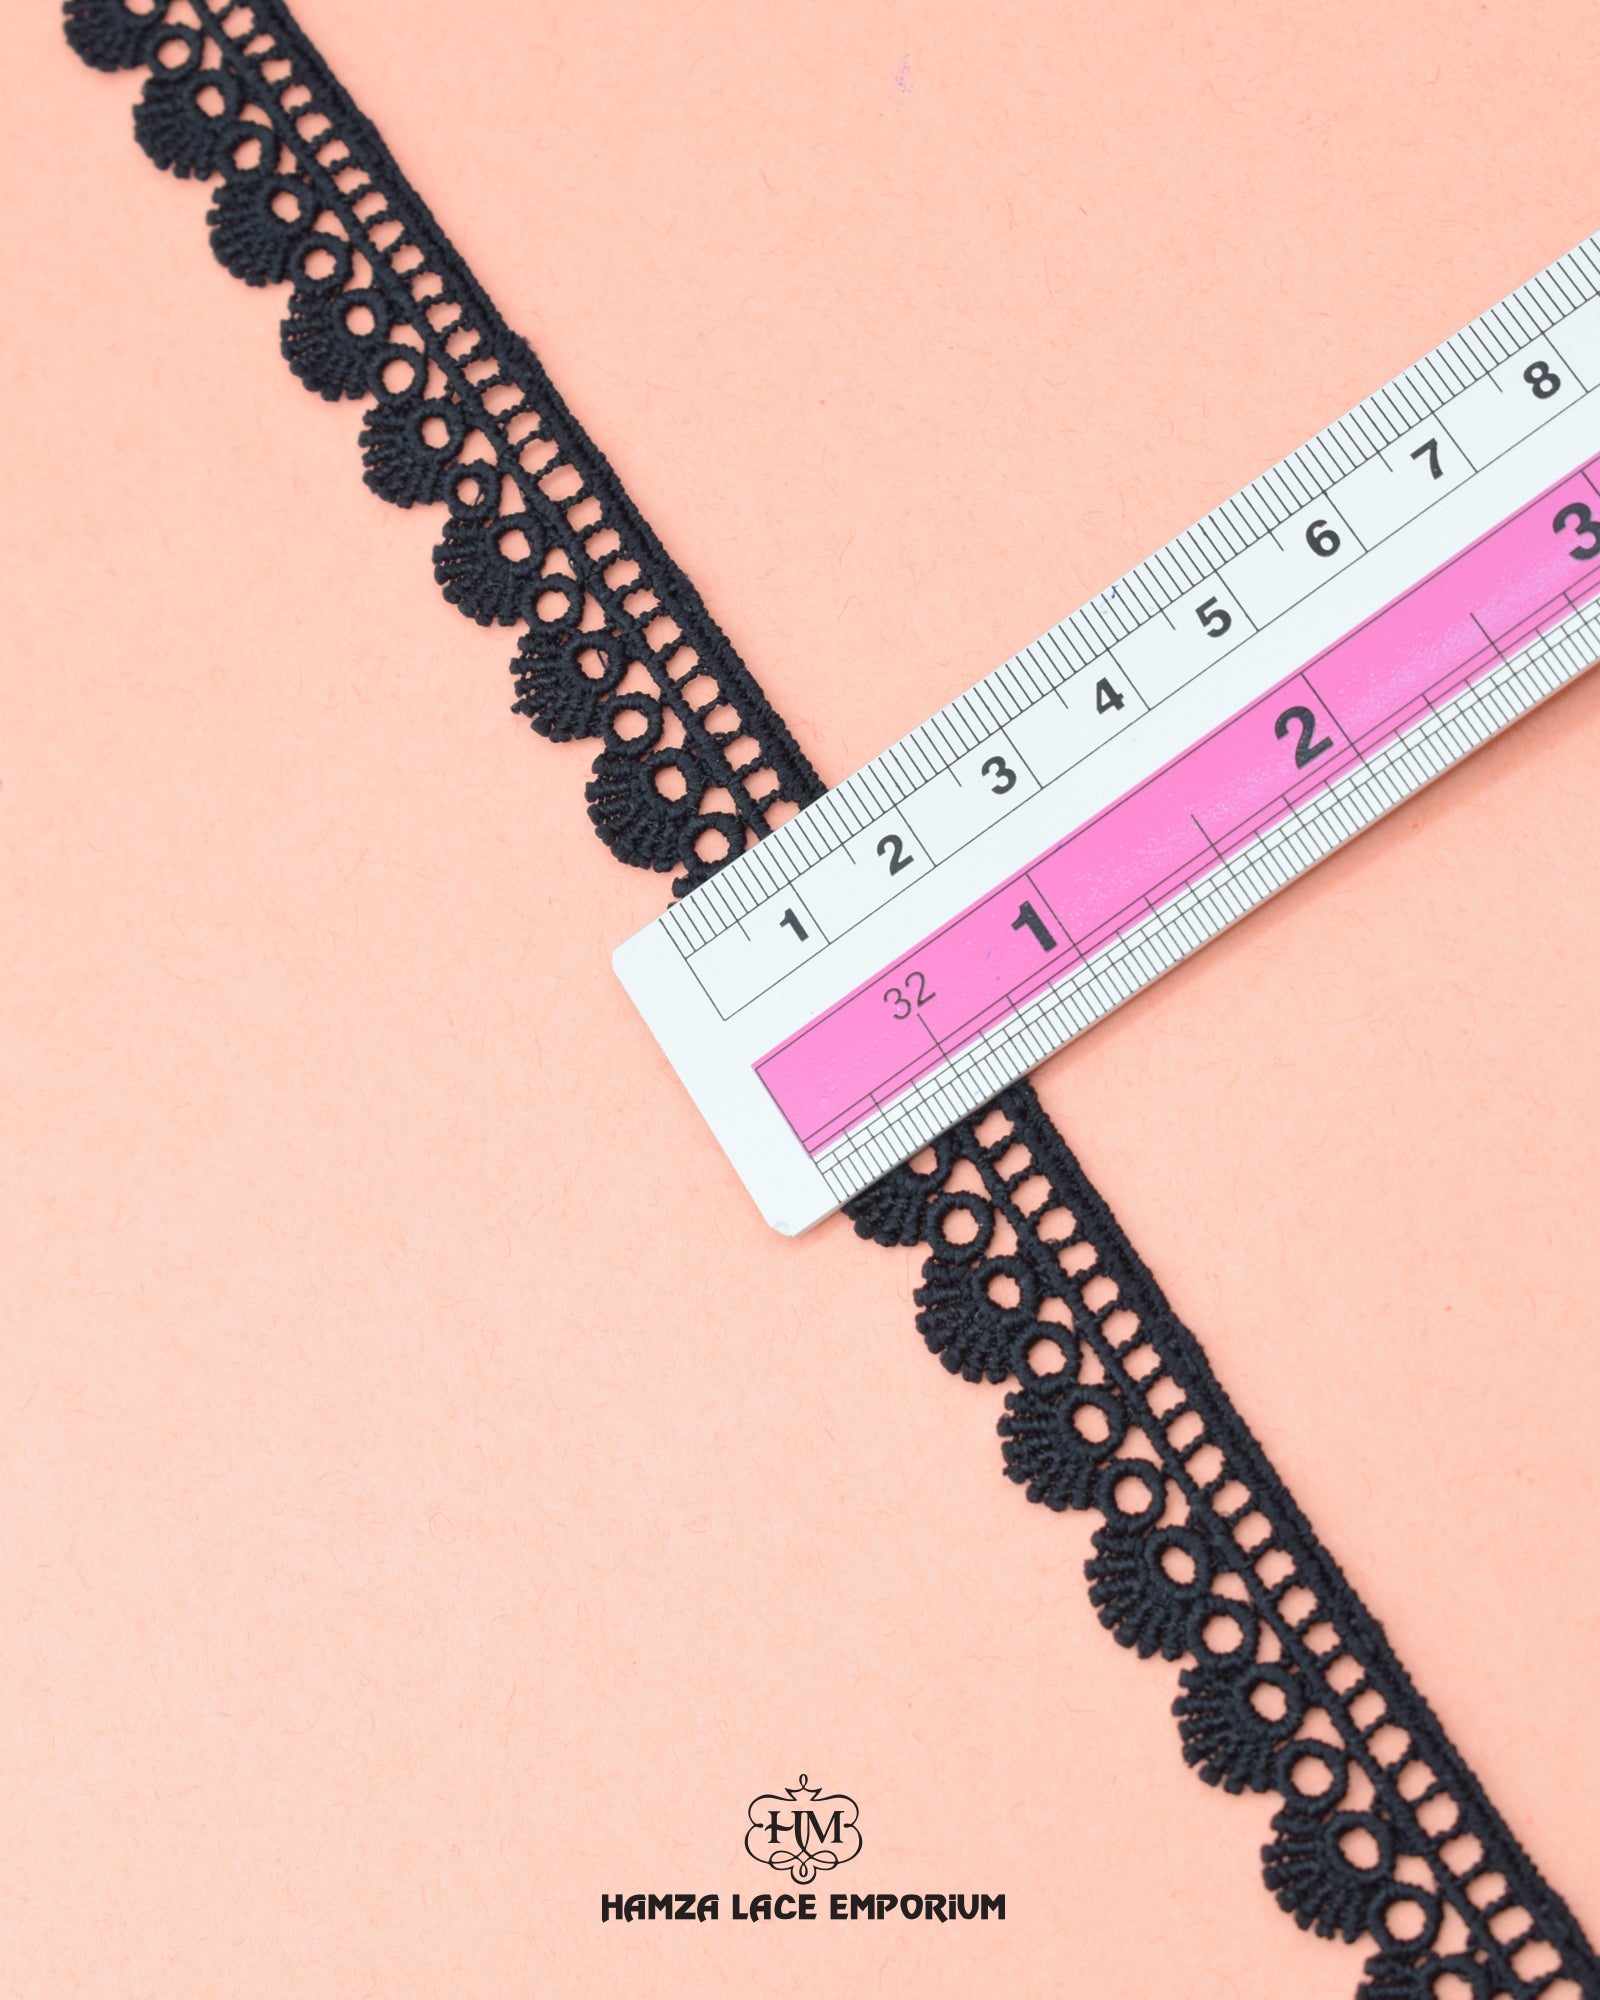 'Edging Lace 294' displayed with a ruler to indicate its width as '0.75' inches.